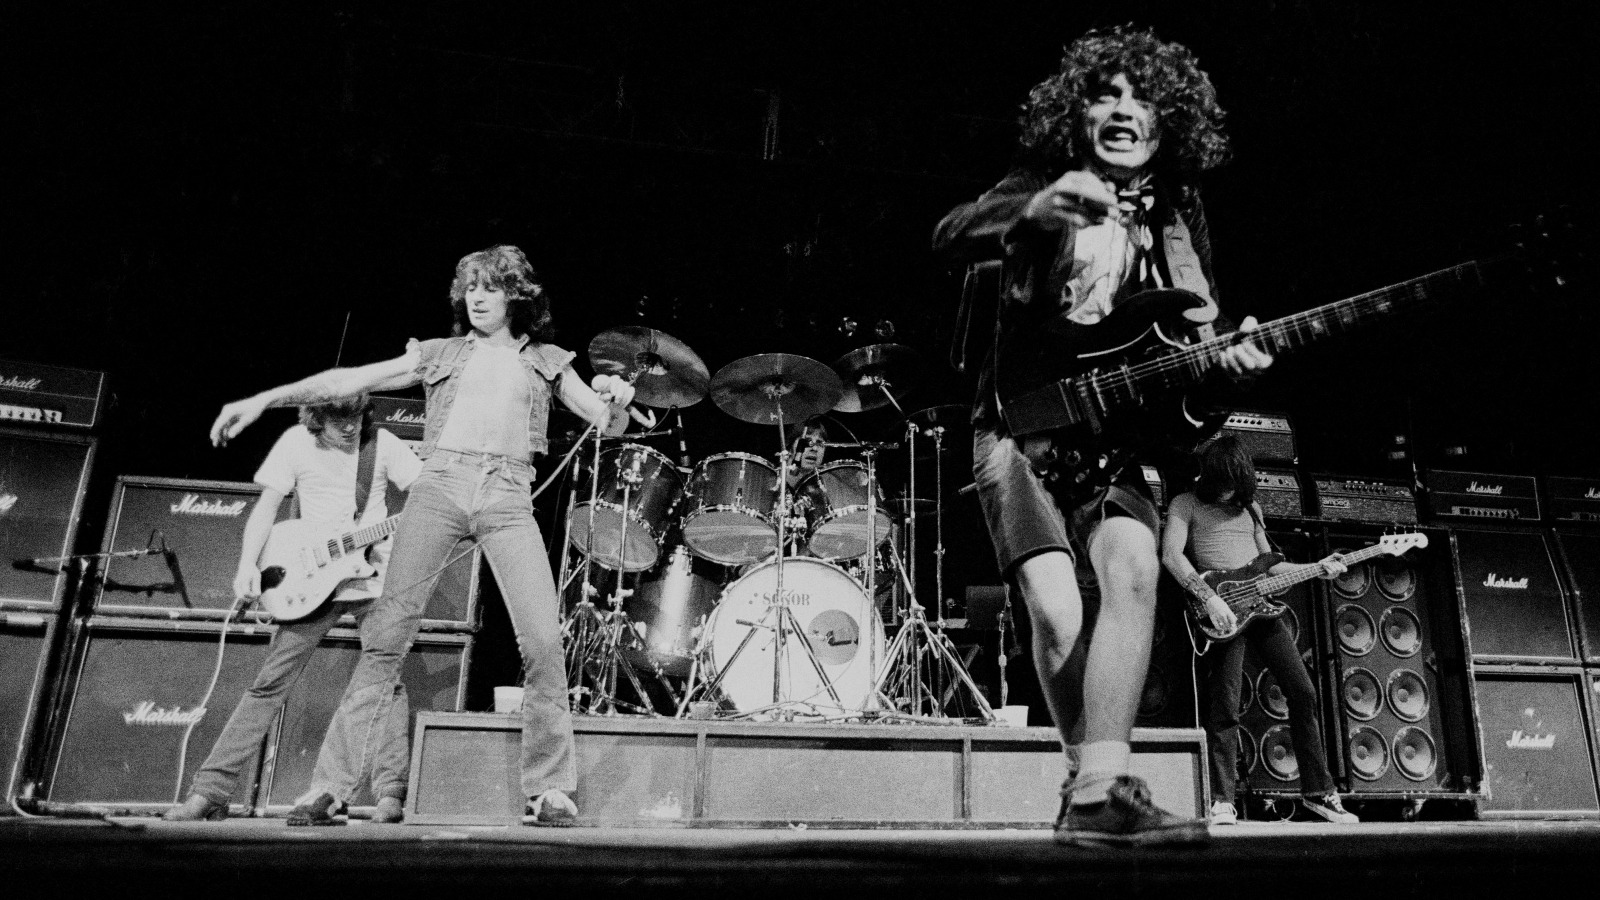 Bon: The Last Highway: The Untold Story of Bon Scott and AC/DC's Back in  Black